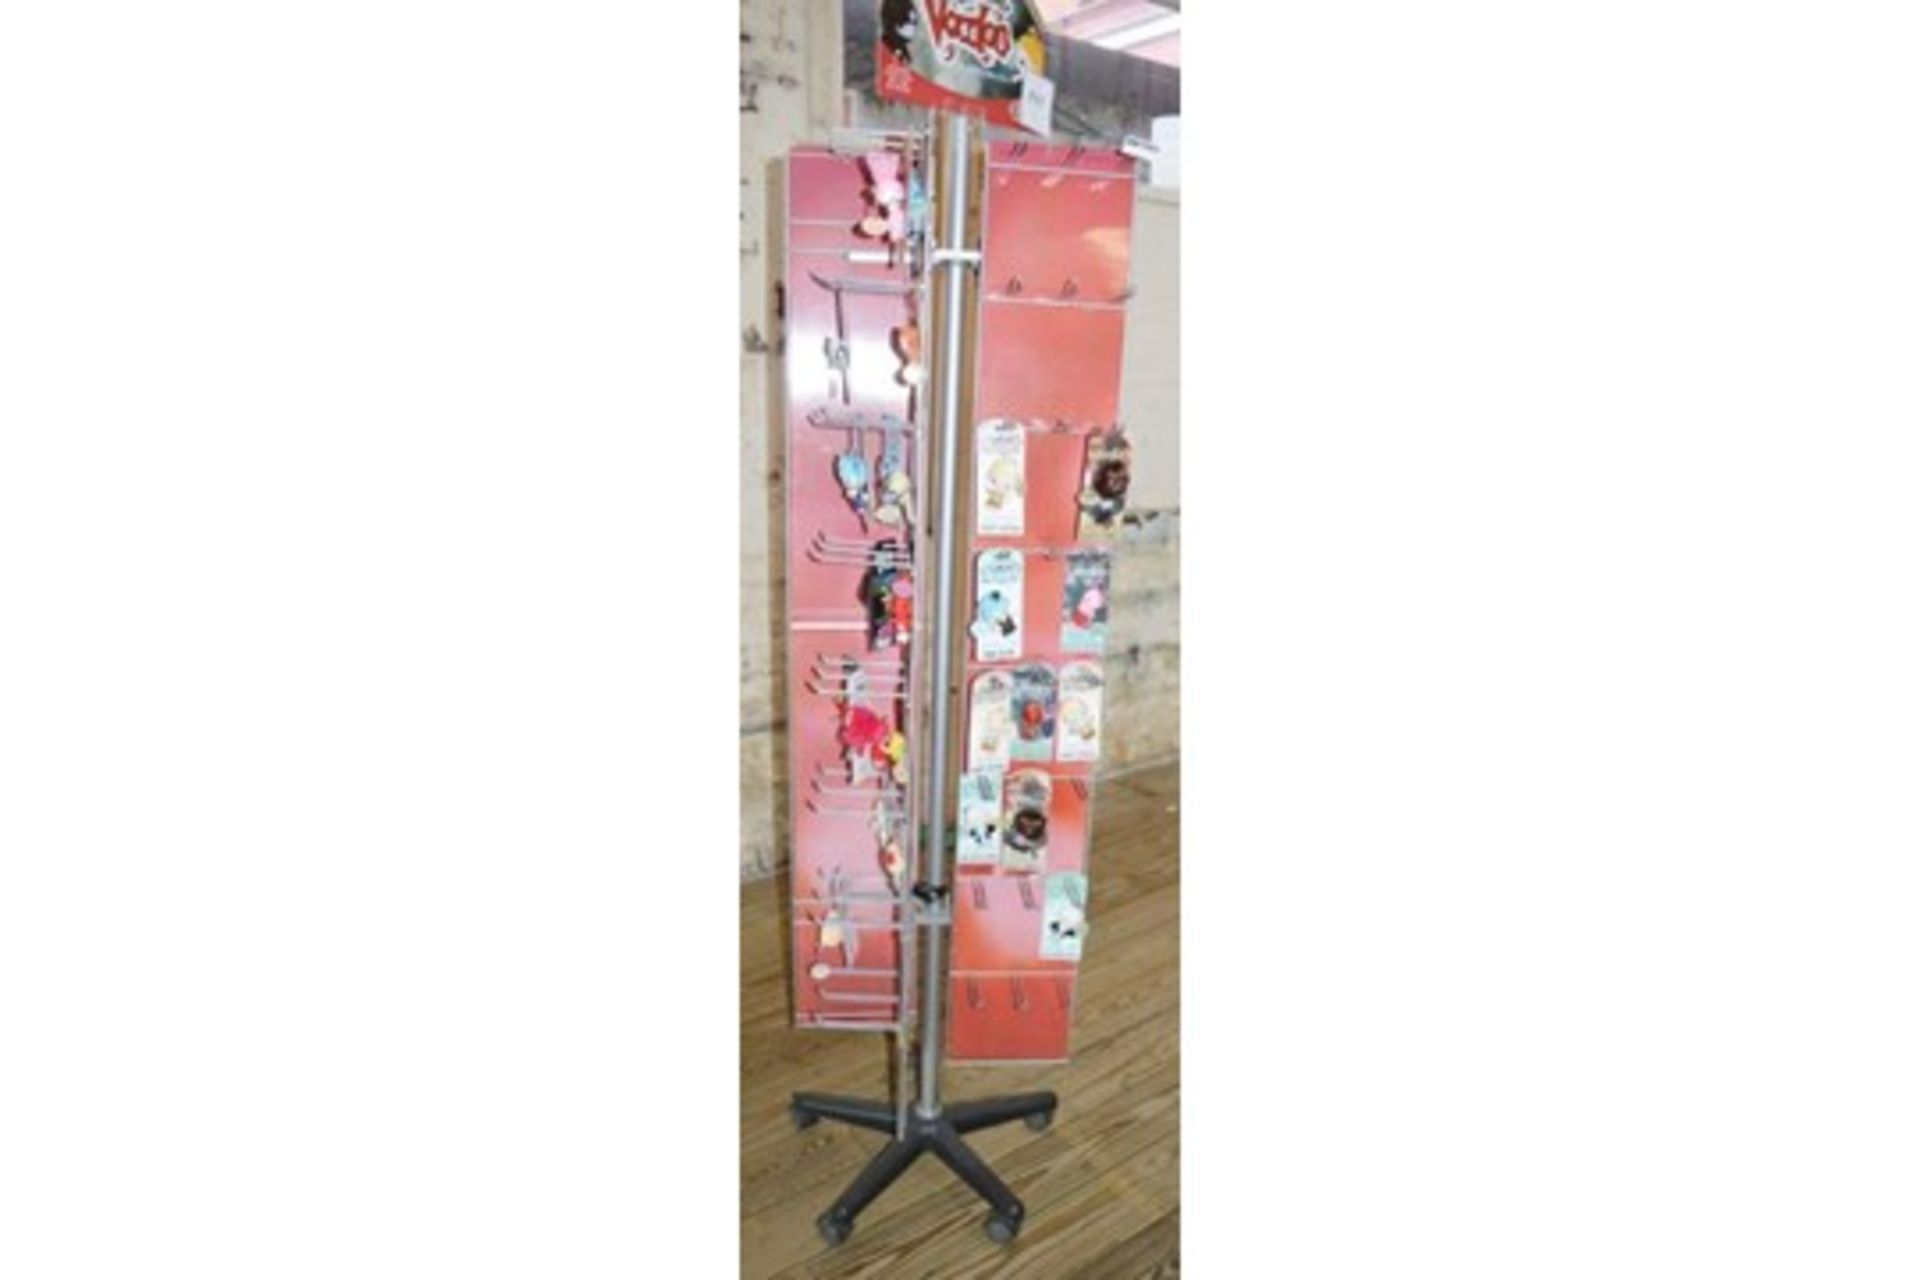 27 x Retail Carousel Display Stands With Approximately 2,800 Items of Resale Stock - Includes - Image 30 of 61